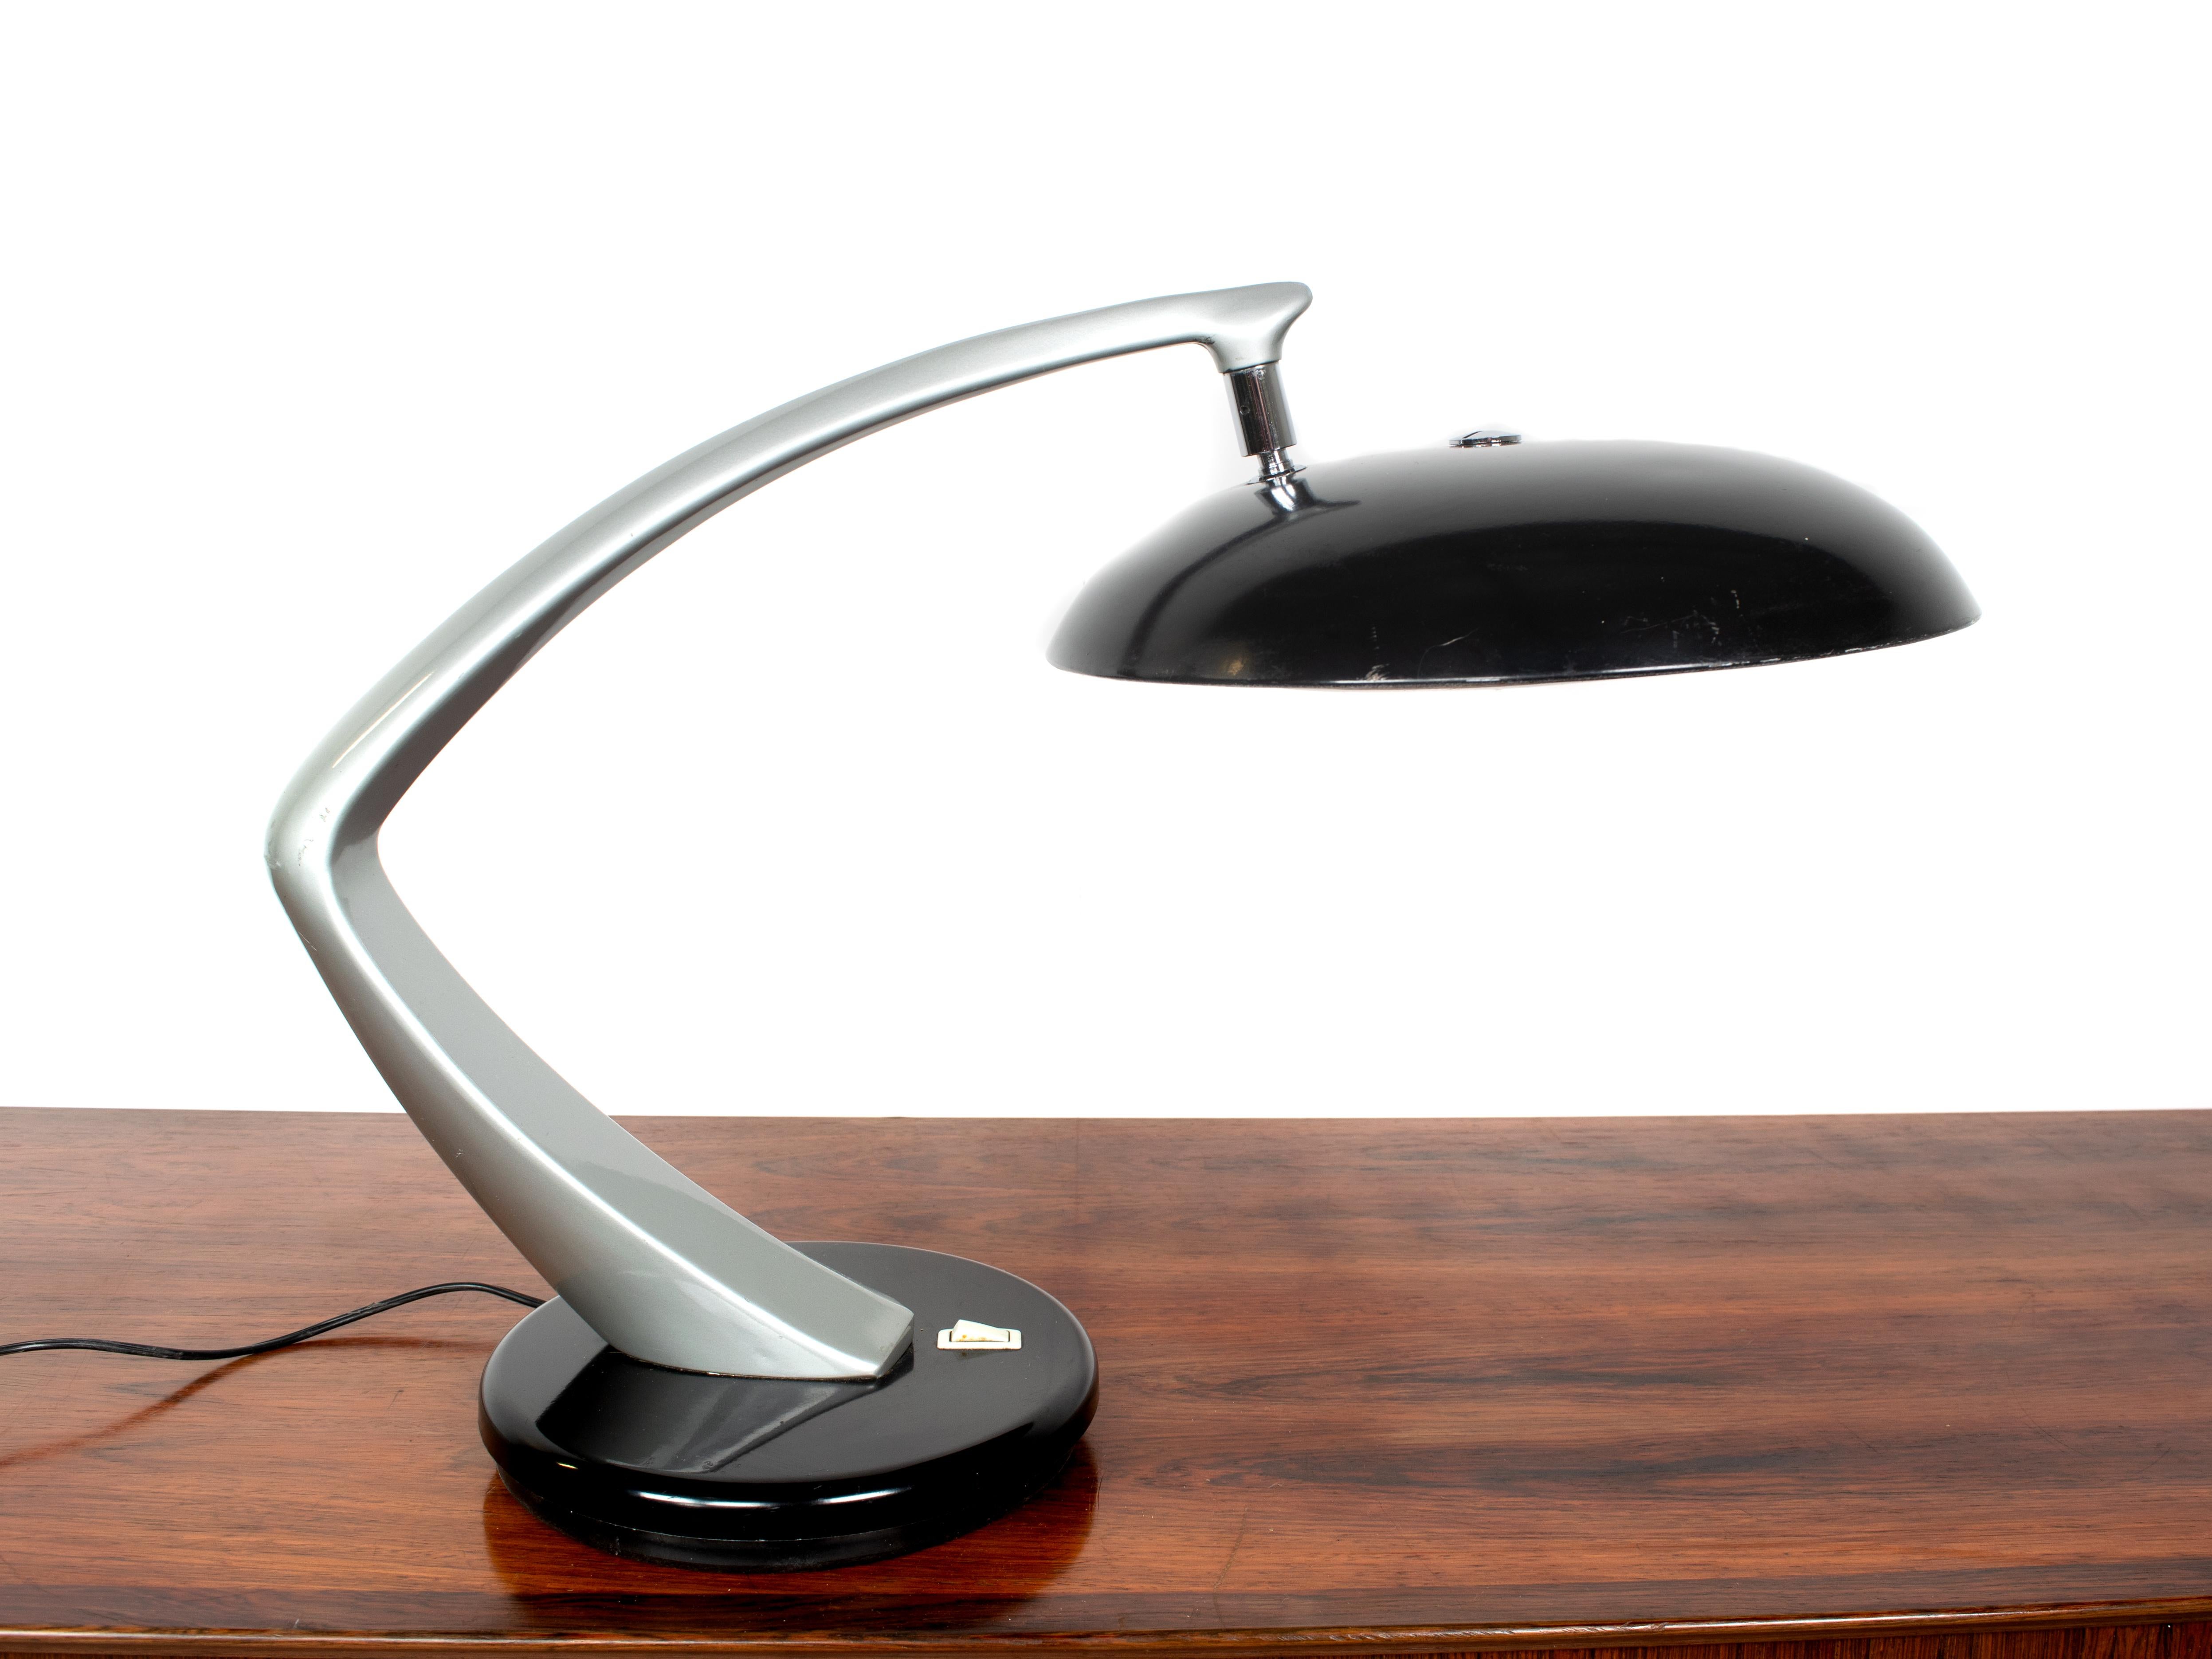 Midcentury desk lamp model 'Boomerang' by Fase from Spain, 1960s. This lamp is has a grey body and black hood, both in metal. The table lamp is 360 degrees turnable, which is very practical. It has a white diffuser, which is in good condition